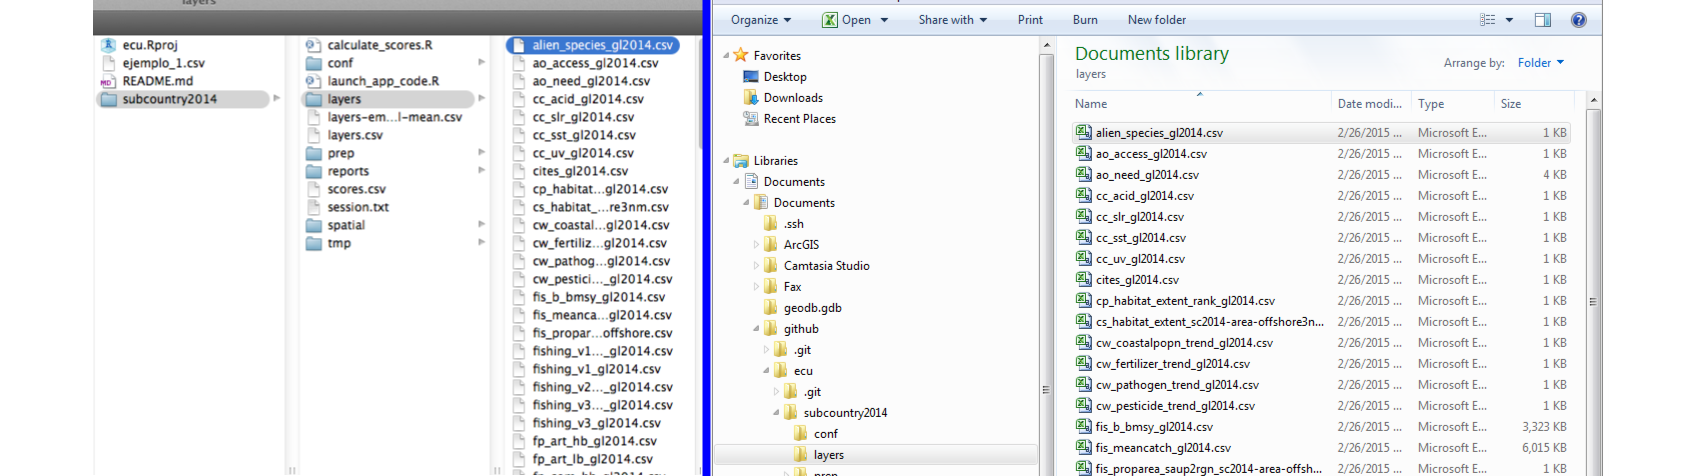 The layers folder contains every data layer as an individual .csv file. Mac navigation is shown on the left and Windows navigation is shown on the right.